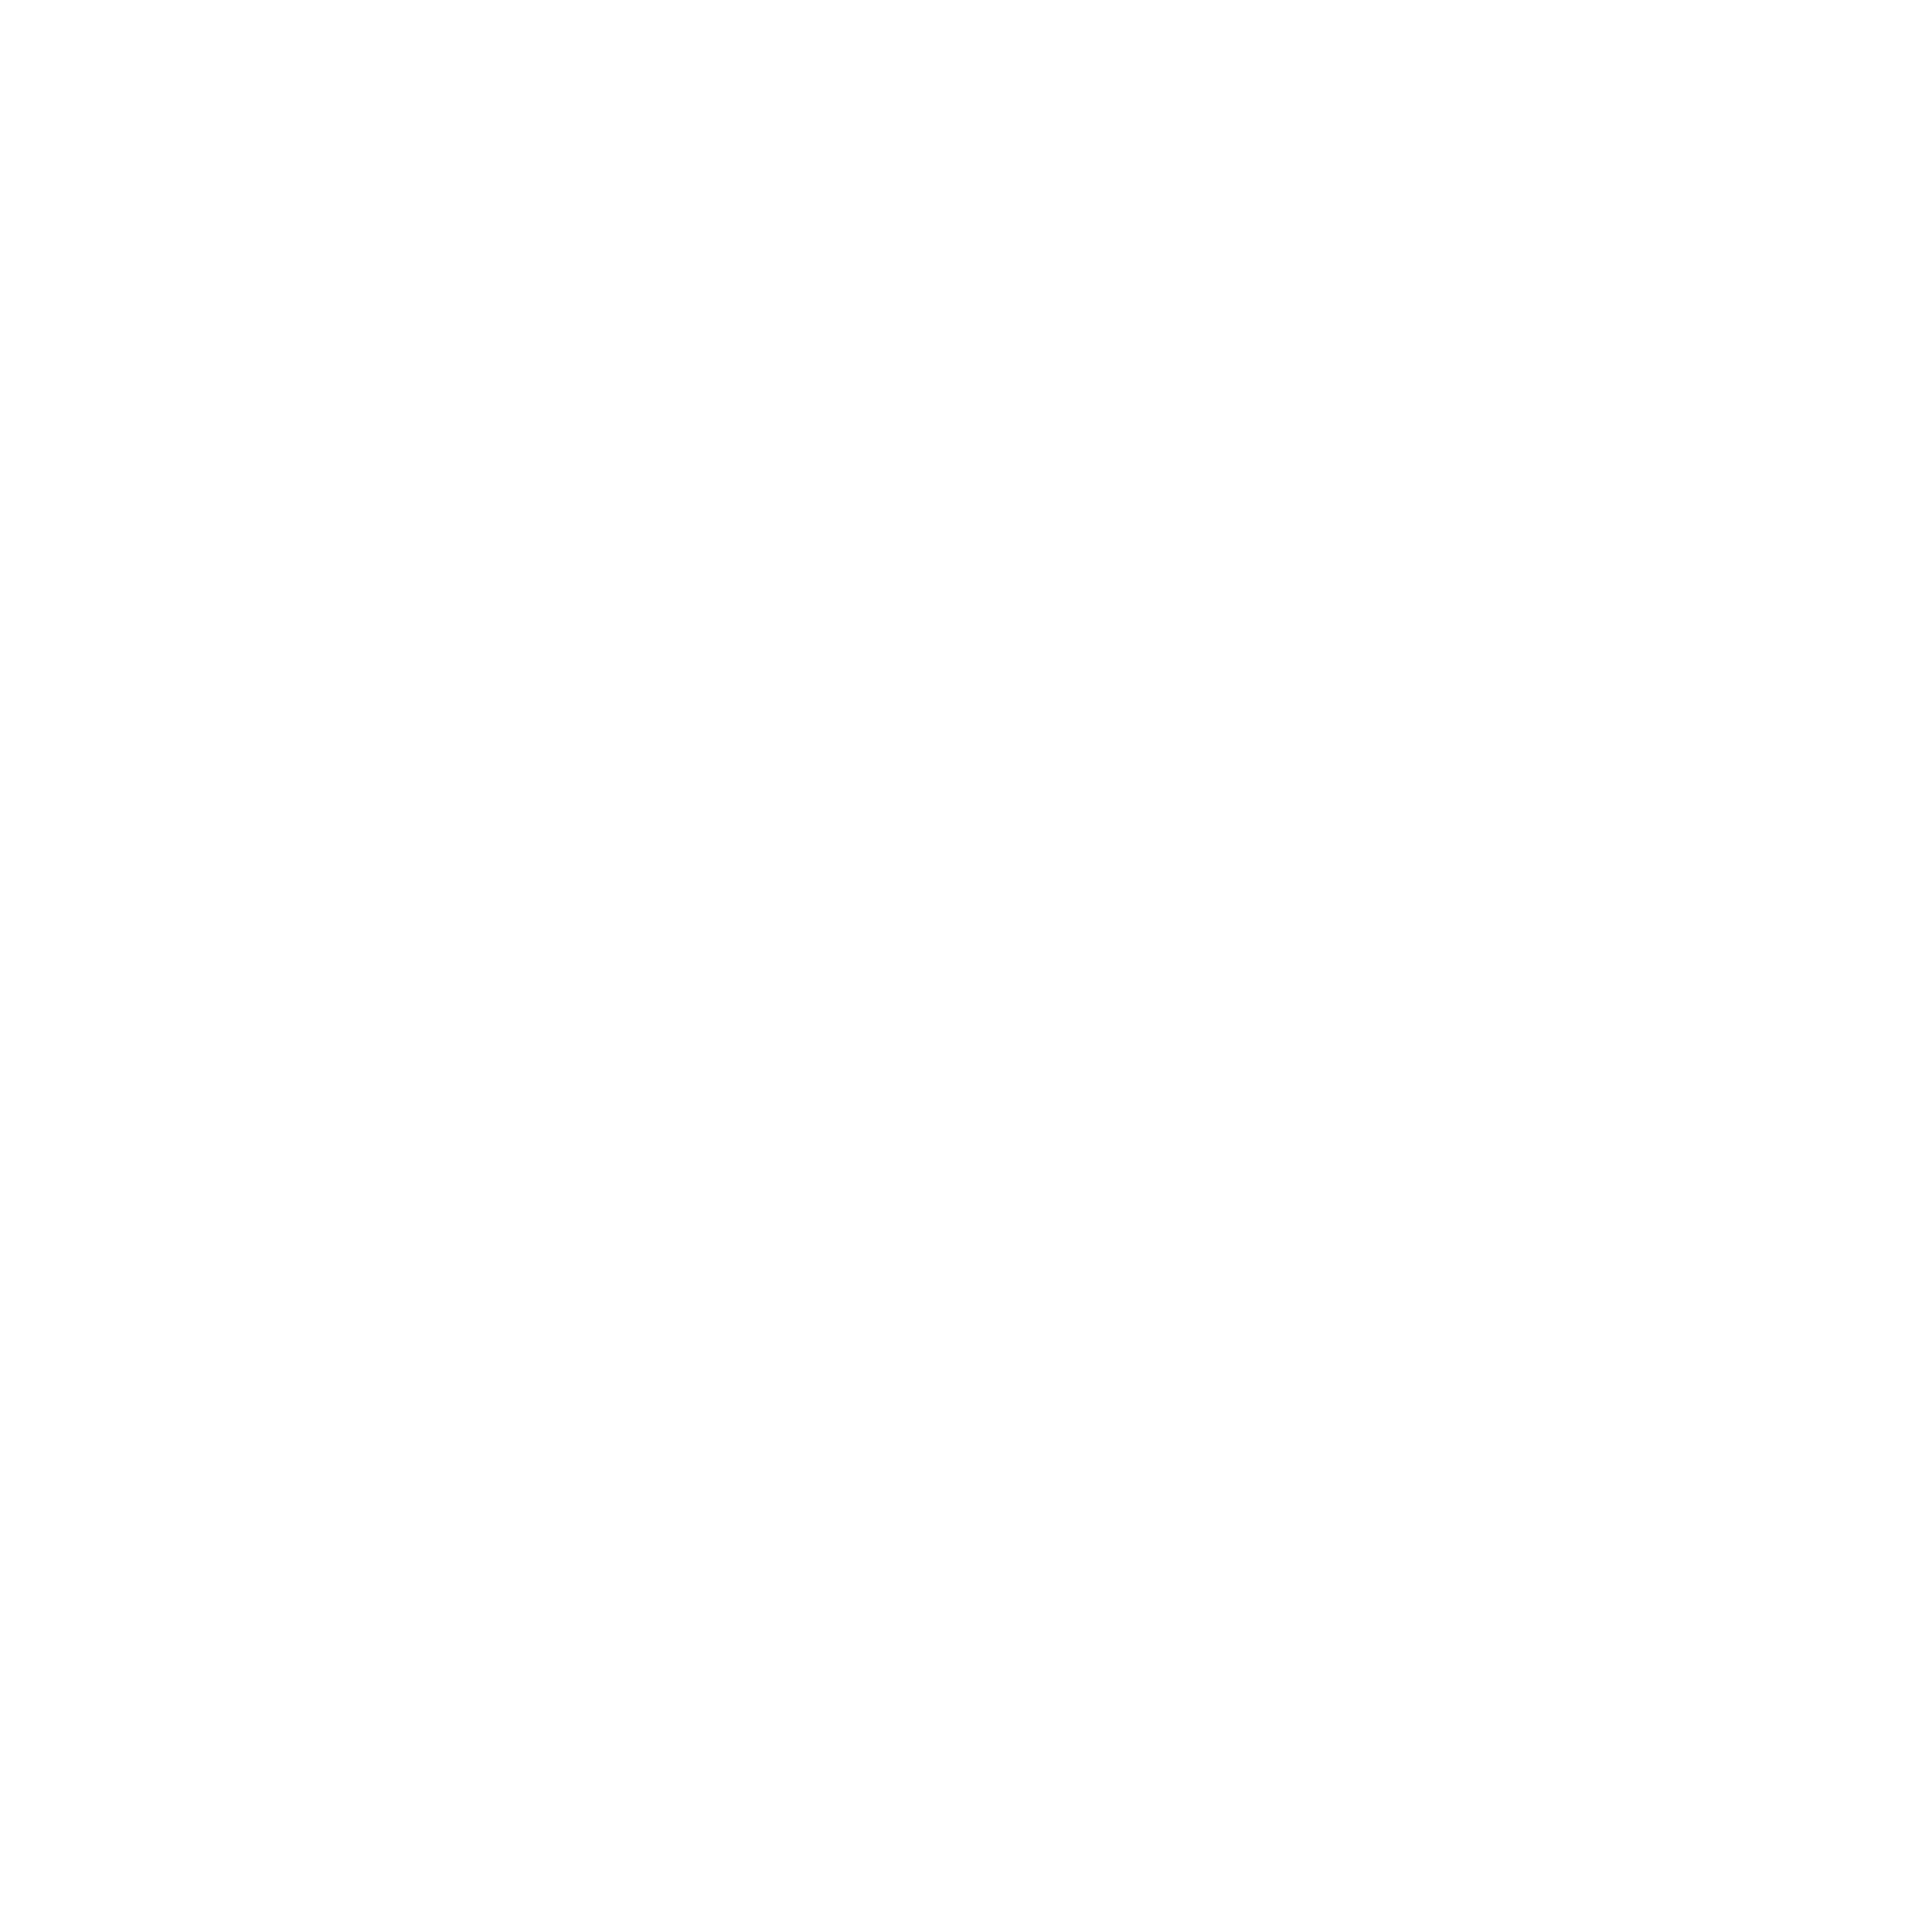 Witness Investment